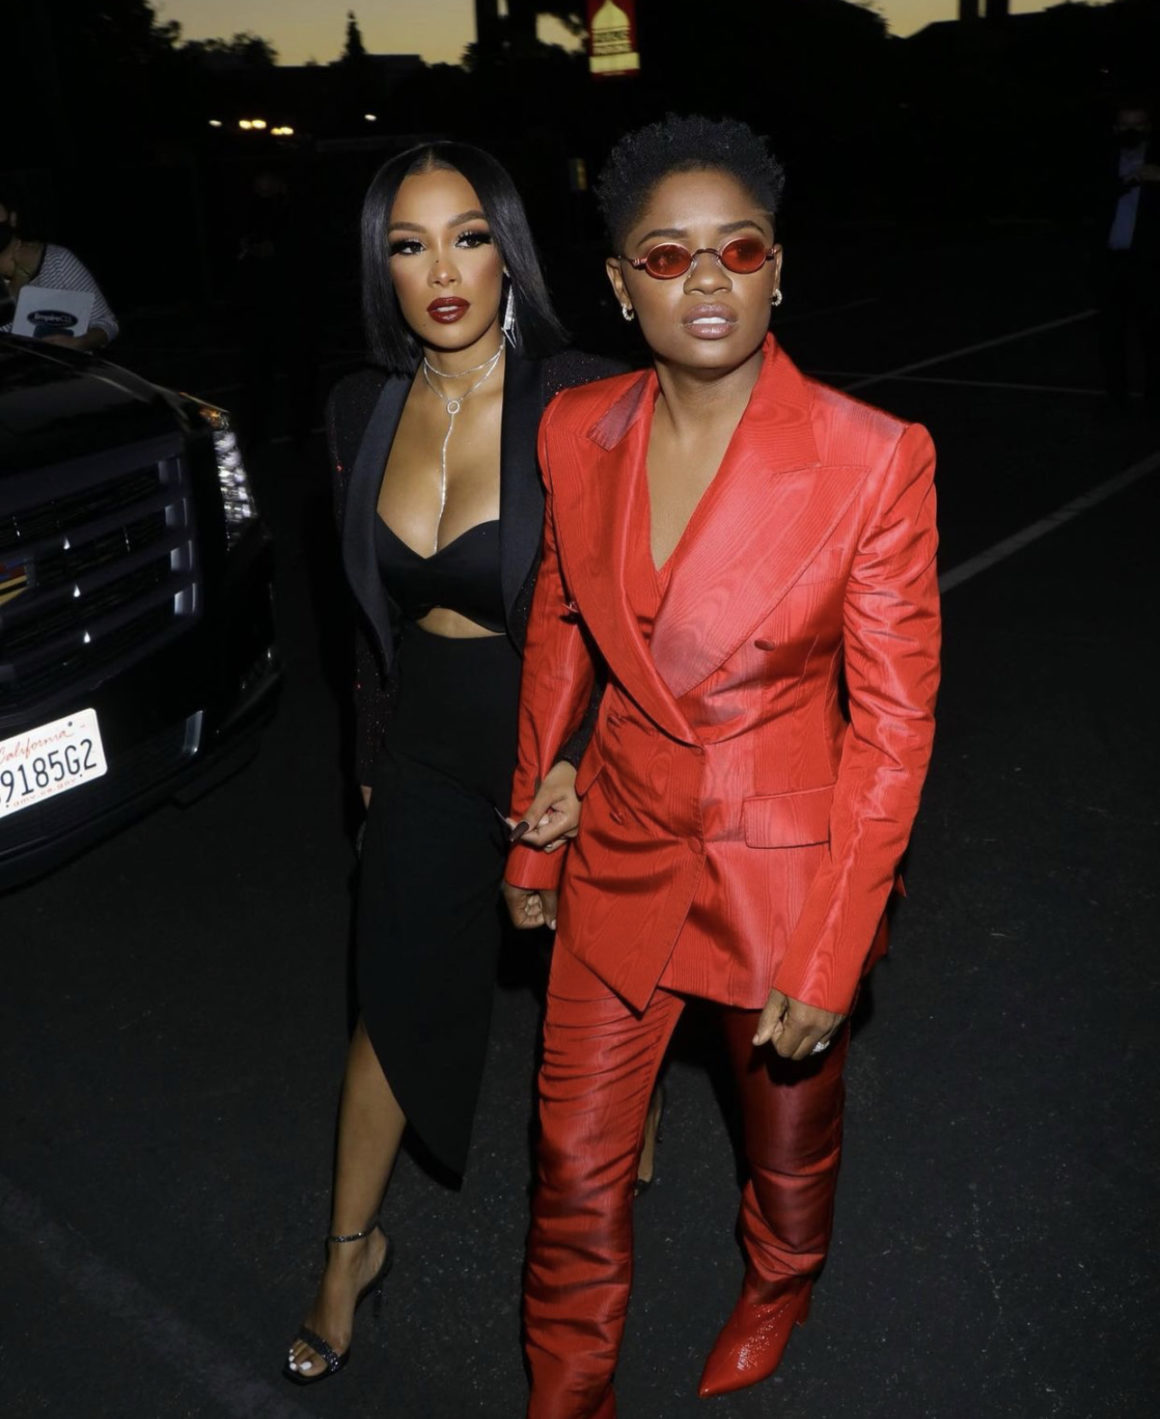 Bre Z and Chris Amore Supply Bomb Couple Style Moment at the The Harder They Fall Premiere in LA Bre Z Wears Dolce and Gabbana Red Suit and Chris Wears Saint Laurent Black Look4